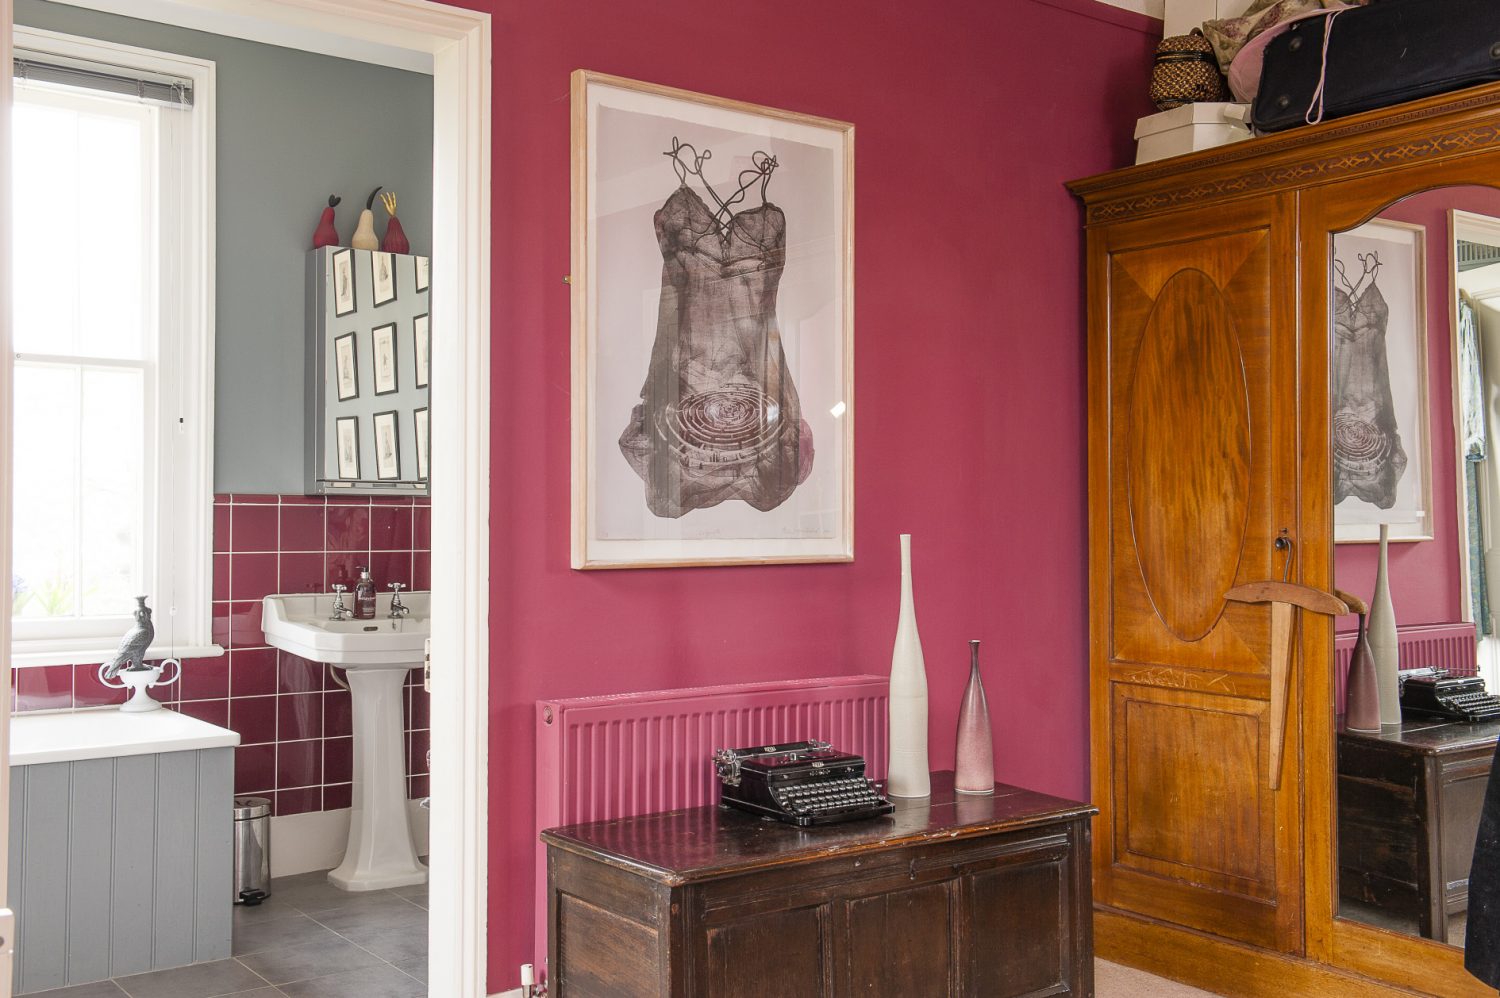 The spare bedroom is painted a juicy raspberry red, the bed covered with a boiled felt throw